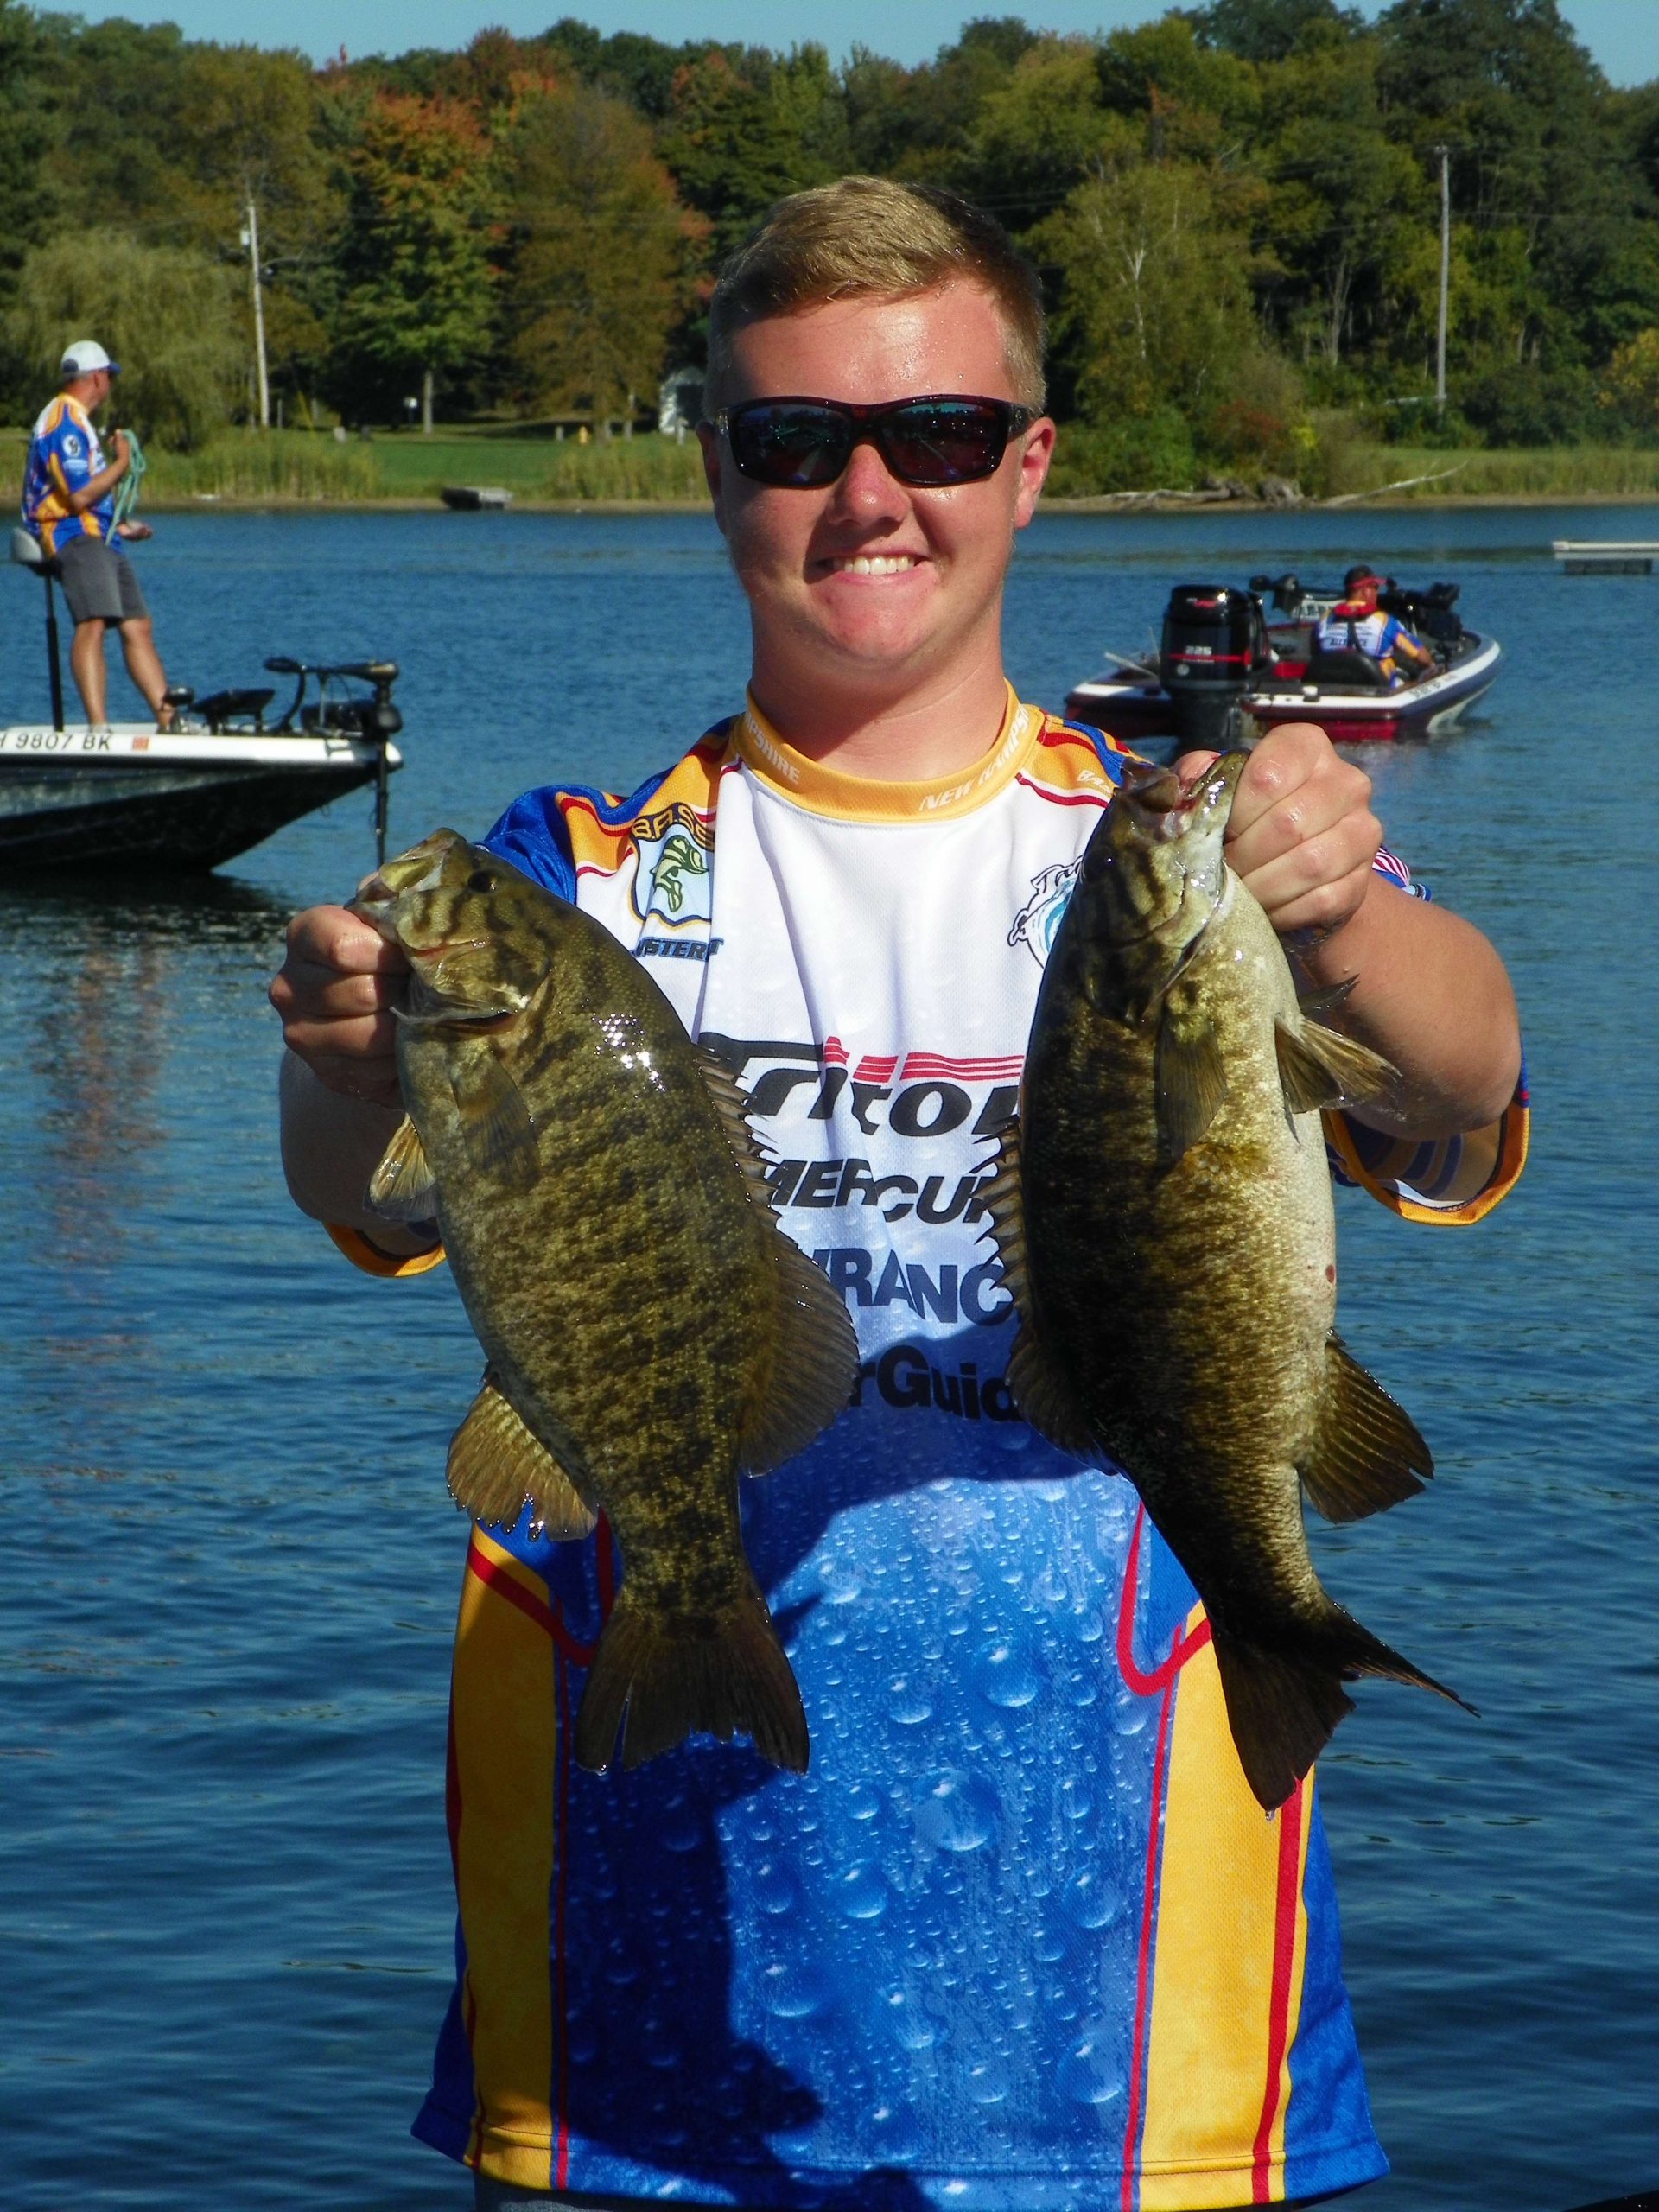 <p><strong>Cam Sterritt, New Hampshire</strong></p>
<p>Sterritt has been a standout competitor since he was 12 years old. He won the 2007 New Hampshire Bassmaster CastingKids state championship for his age group and a slew of Junior Bassmaster titles over the years. He and his partner finished second among 60 teams in the 2014 Bassmaster High School National Championship on Kentucky Lake. He won the inaugural New Hampshire Interscholastic Athletic Association (NHIAA) High School Bass Fishing State Championship in 2013, as well as the NHIAA High School Qualifier for the state championship that year and he Angler of the Year in 2014.</p>
<p>Sterritt, now a senior, founded the Exeter High School Blue Hawks Bass Fishing Team. He volunteers at Camp Carefree for children with diabetes, CastingKids competitions, cleanup projects at state parks and a fish tagging project for the New Hampshire Fish & Game.</p>
<p>Read his full profile <a href=